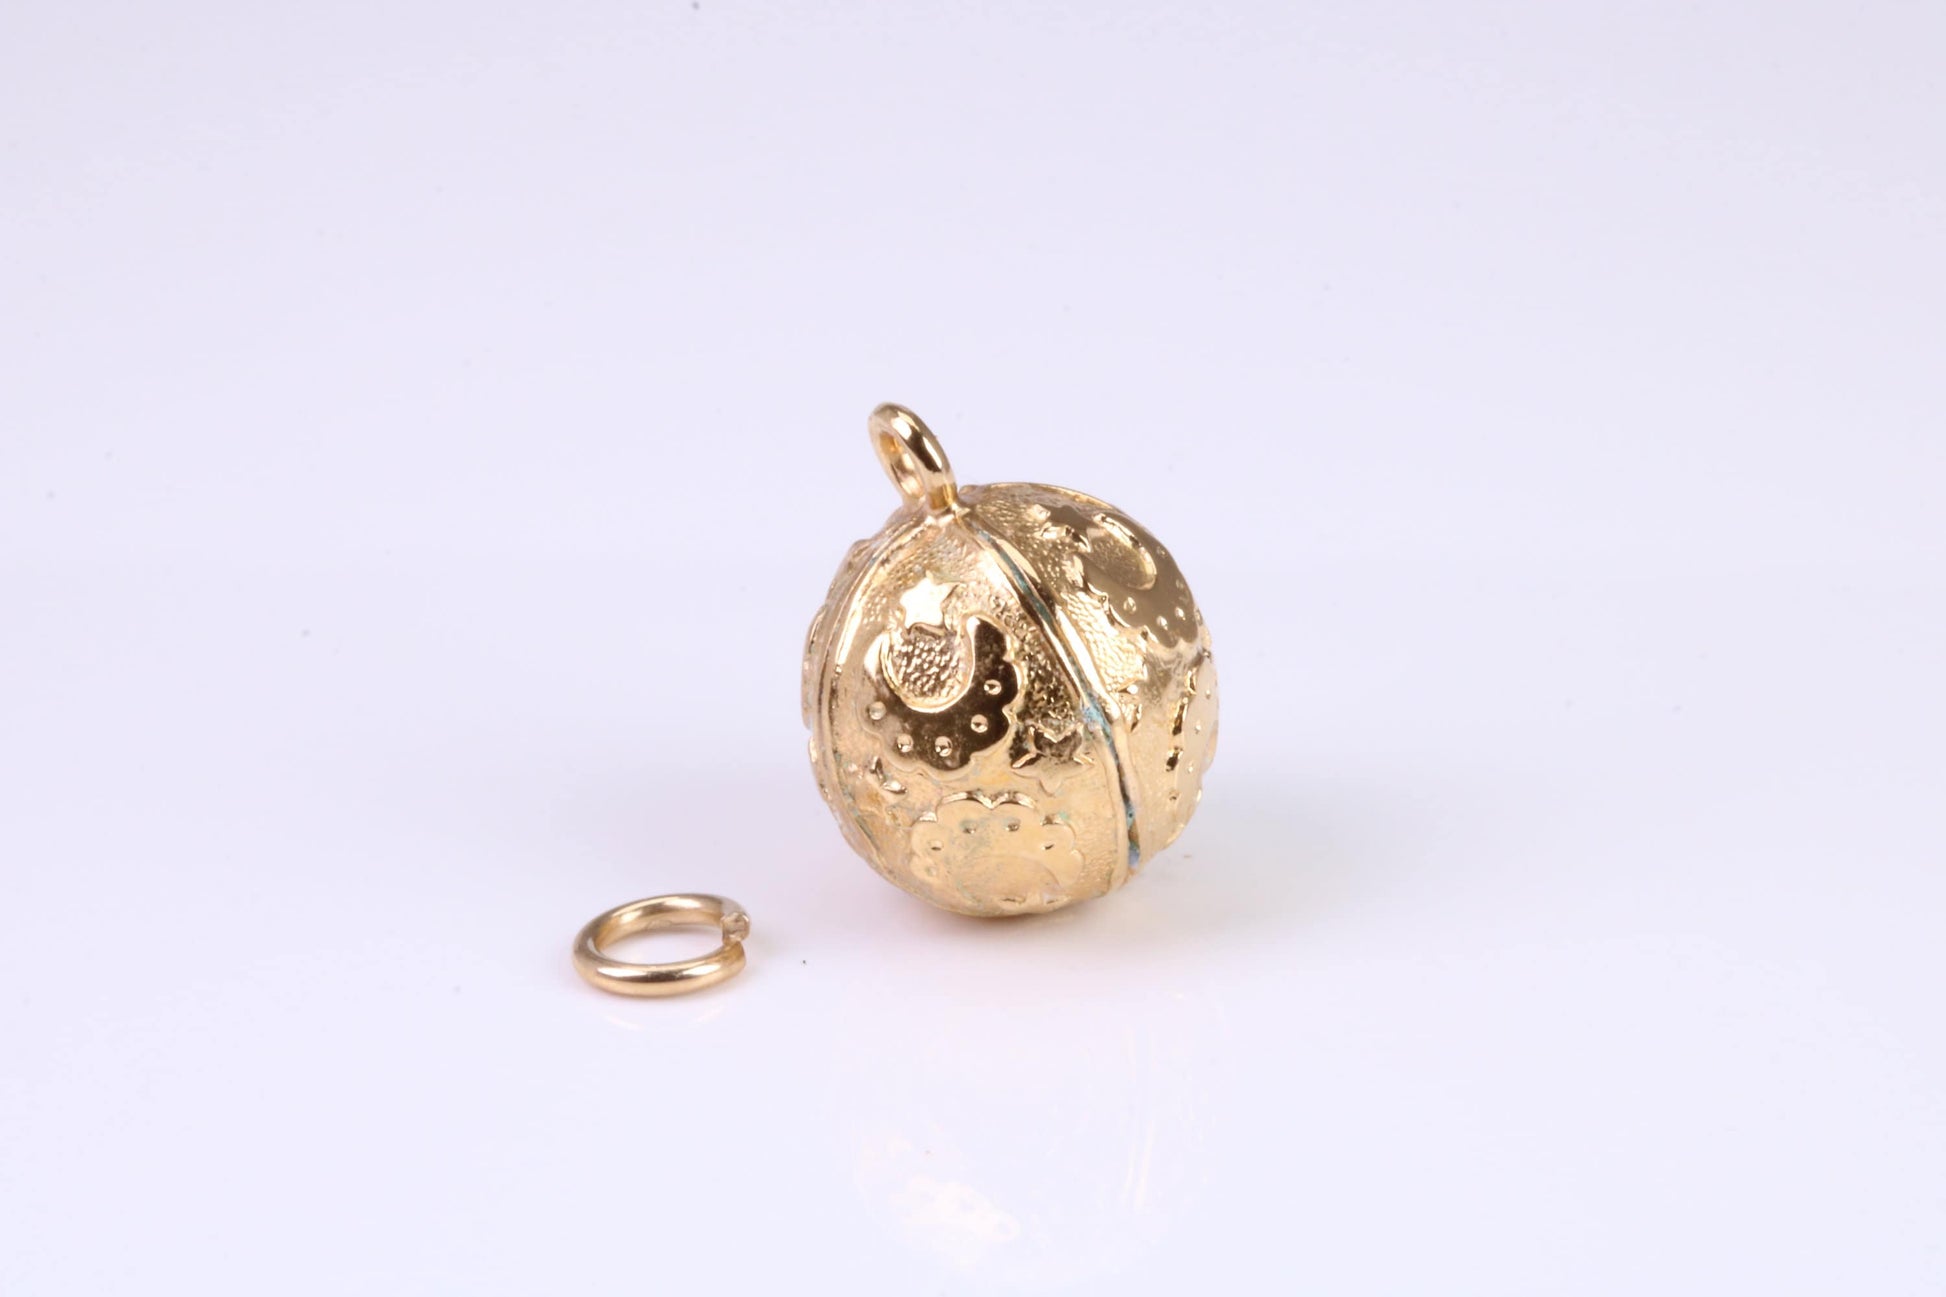 Moon and Star Sphere Charm, Traditional Charm, Made from Solid Yellow Gold, British Hallmarked, Complete with Attachment Link